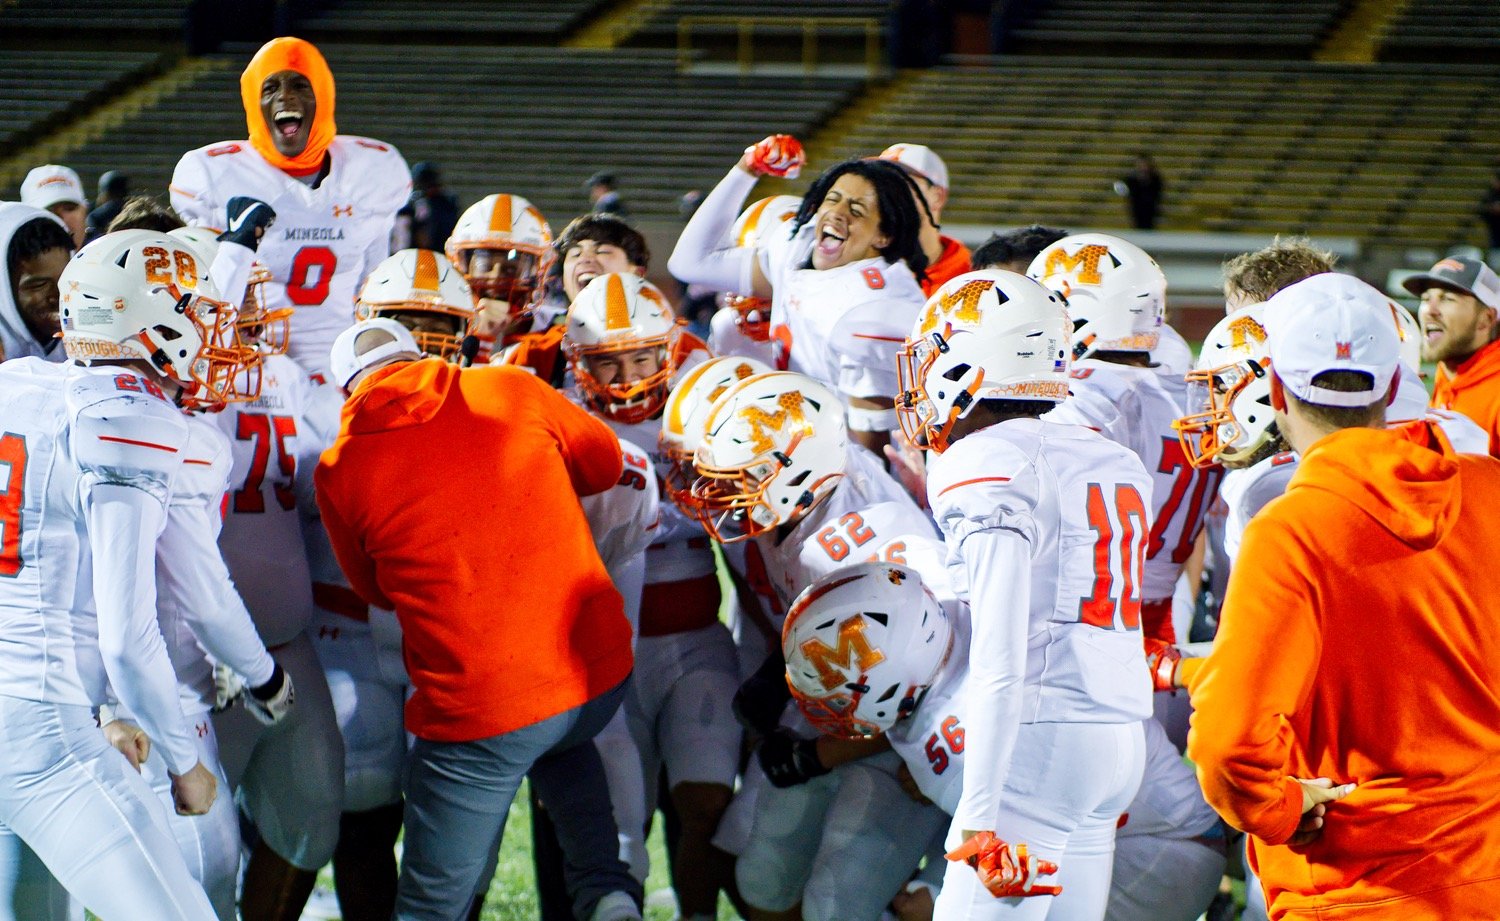 After completing a second-half comeback to clinch the fourth and final district playoff spot, Mineola players celebrate Saturday night in Commerce. [find more football photos]